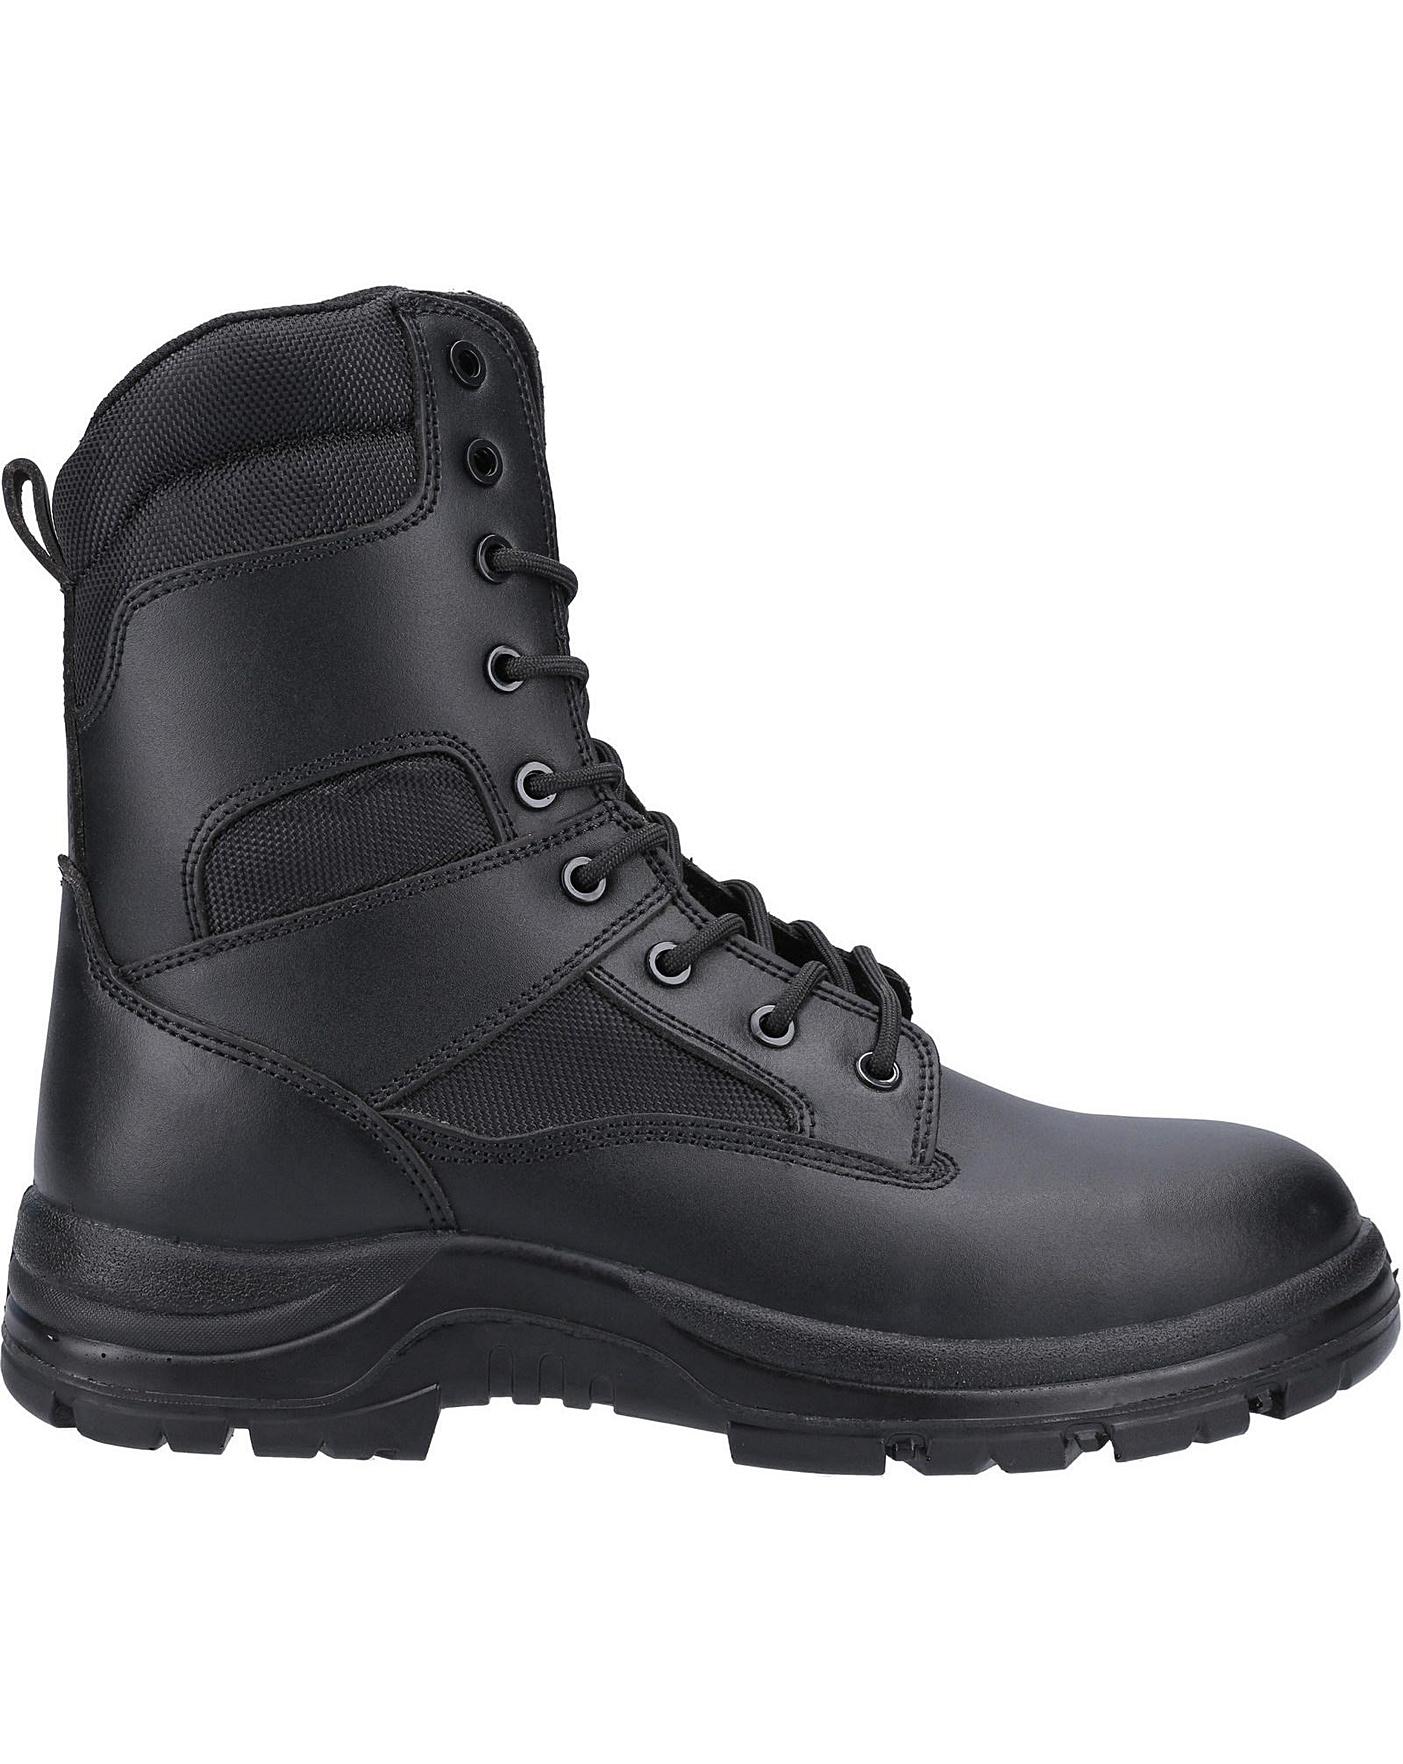 Amblers Safety FS009C Boot